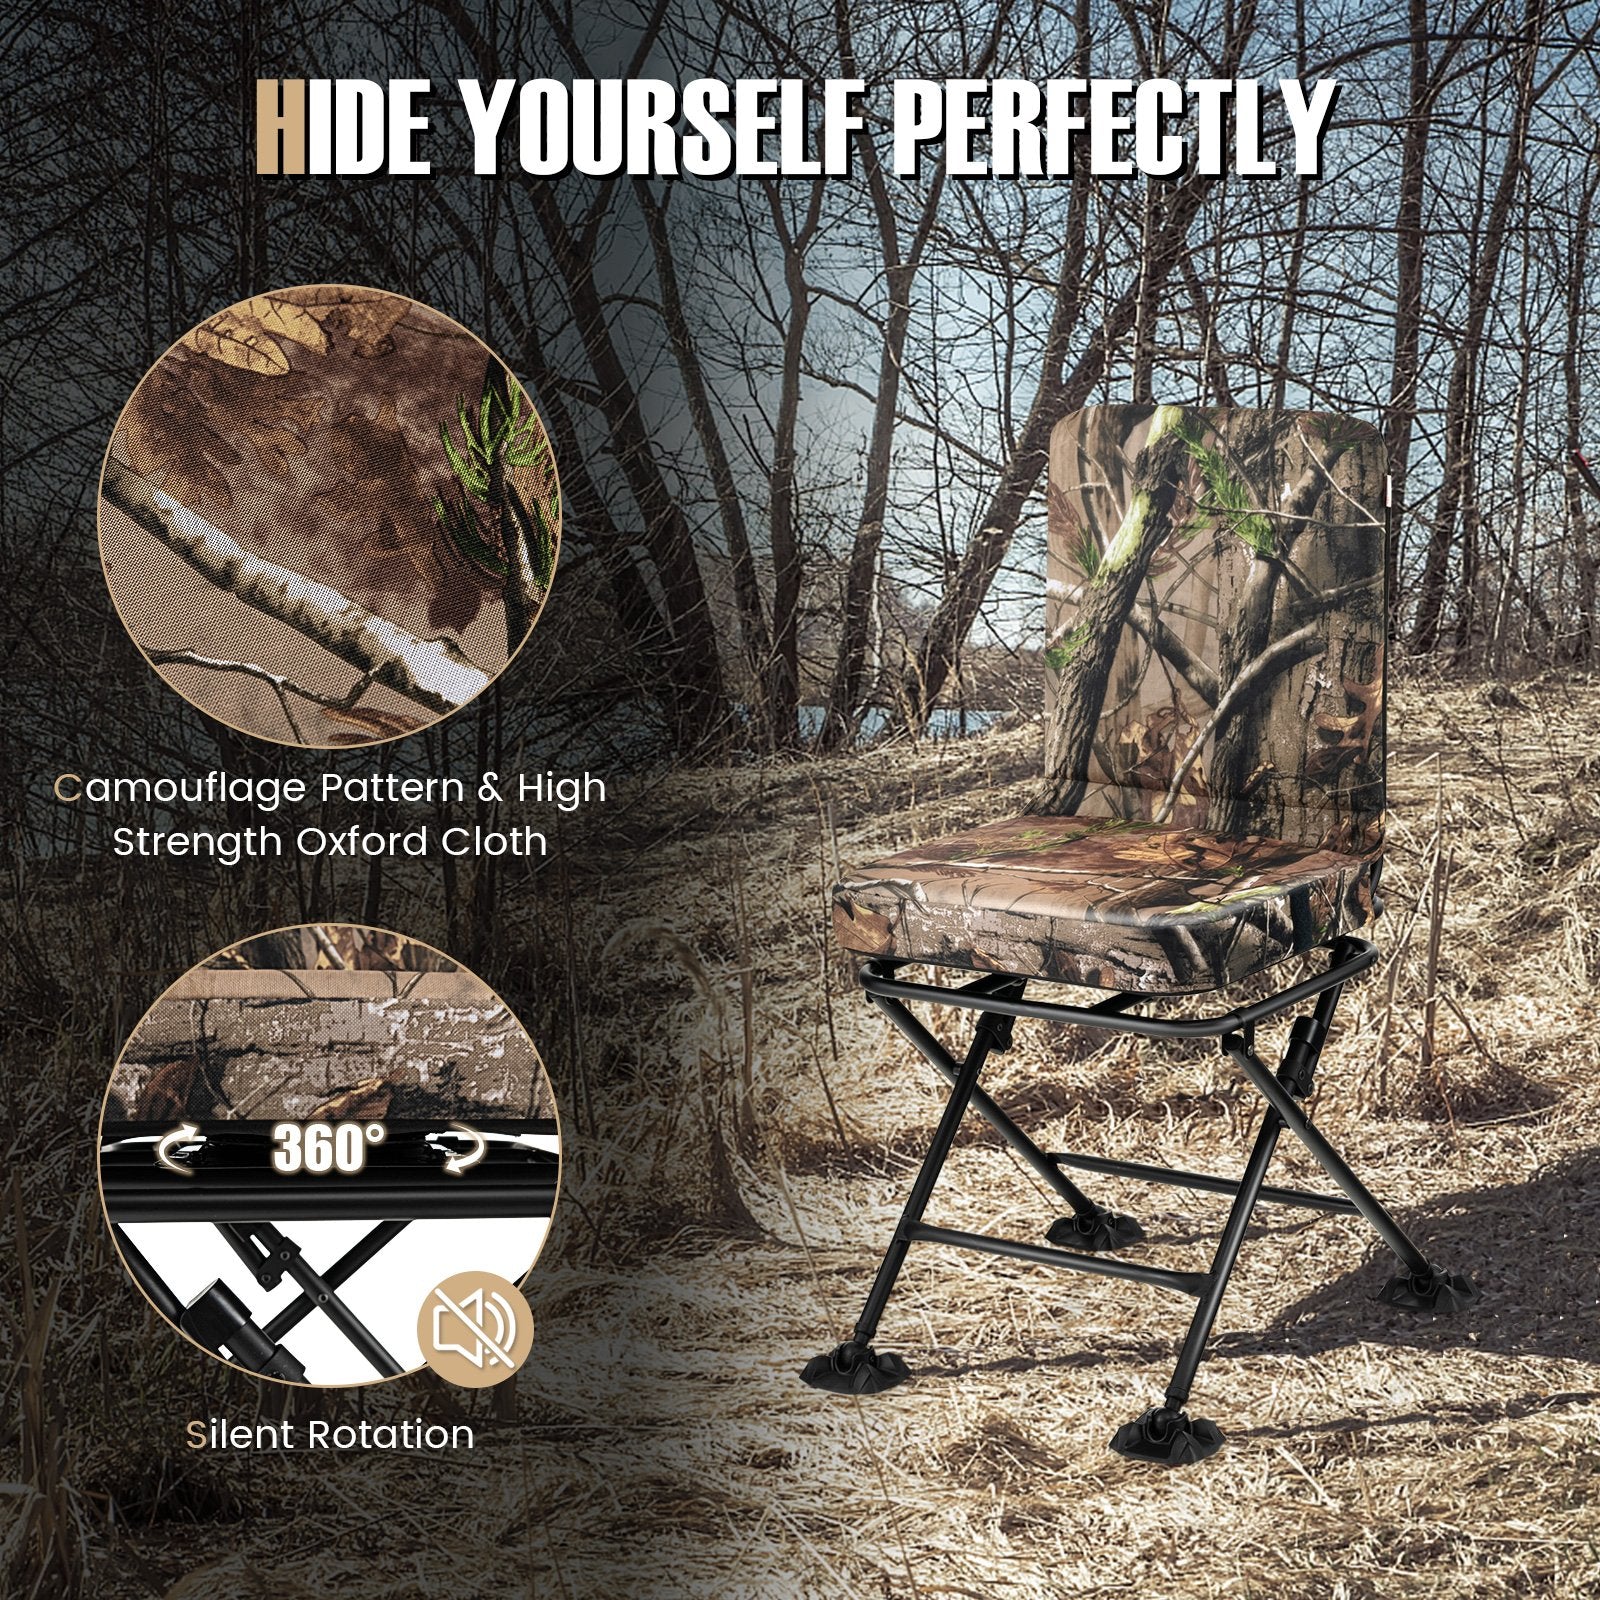 Swivel Folding Chair with Backrest and Padded Cushion, Camouflage - Gallery Canada